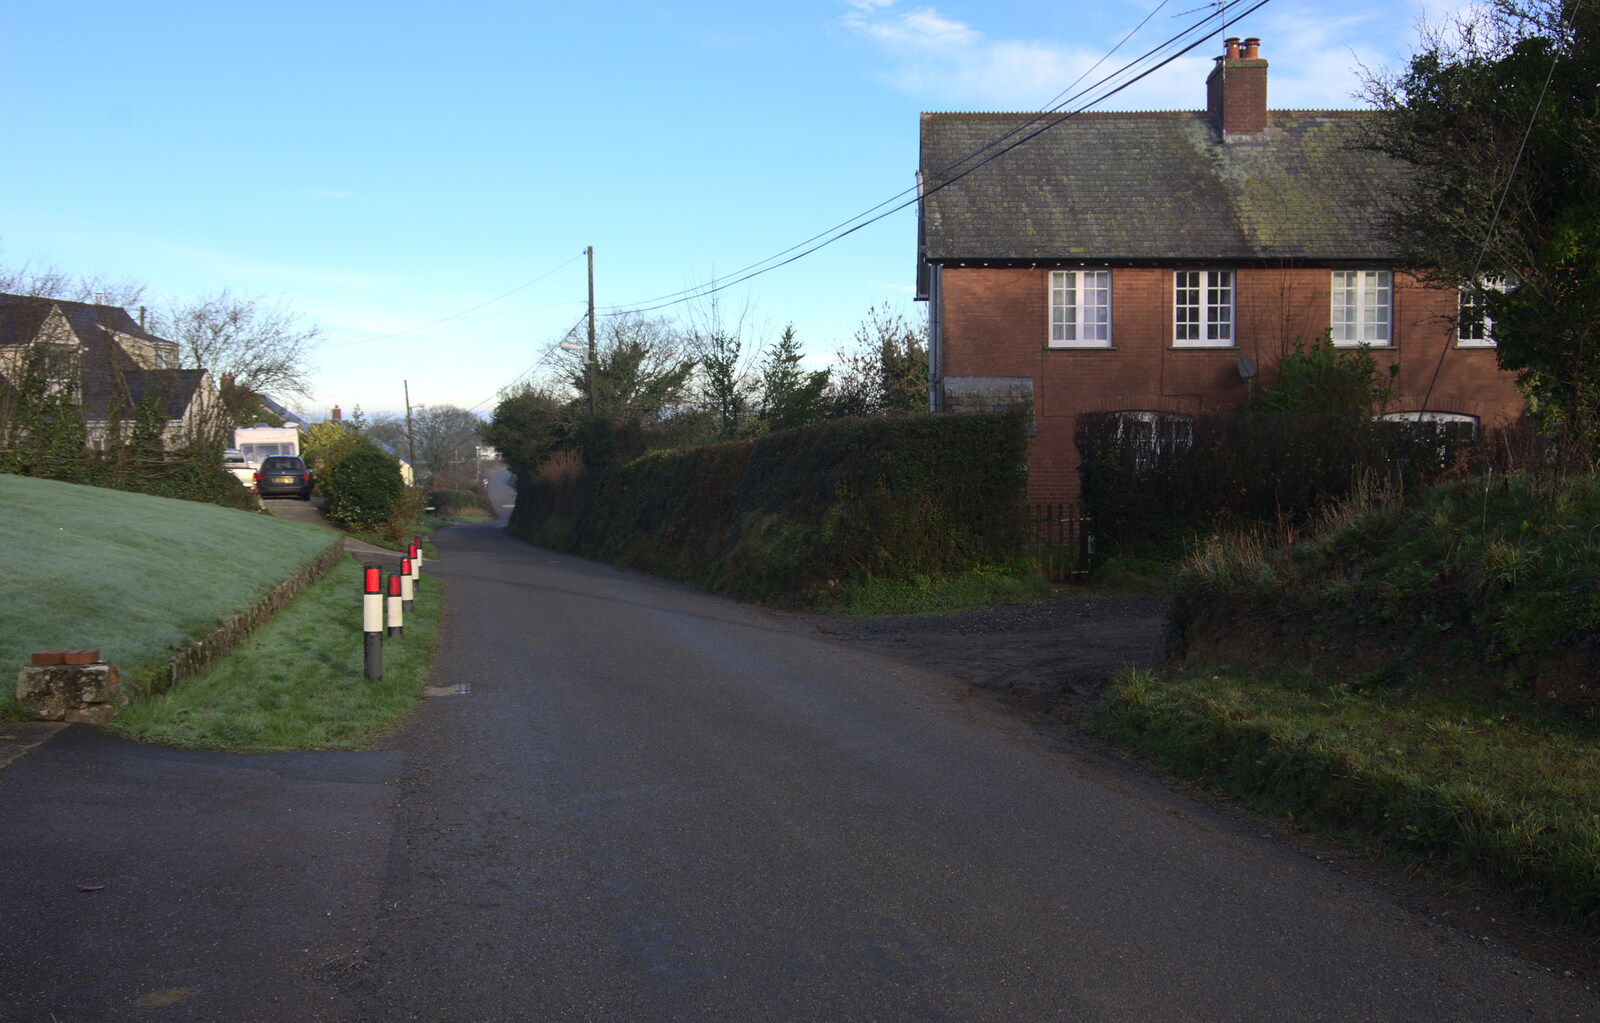 The house which looks a bit like Ford Cottage from Boxing Day in Devon, Spreyton, Devon - 26th December 2018